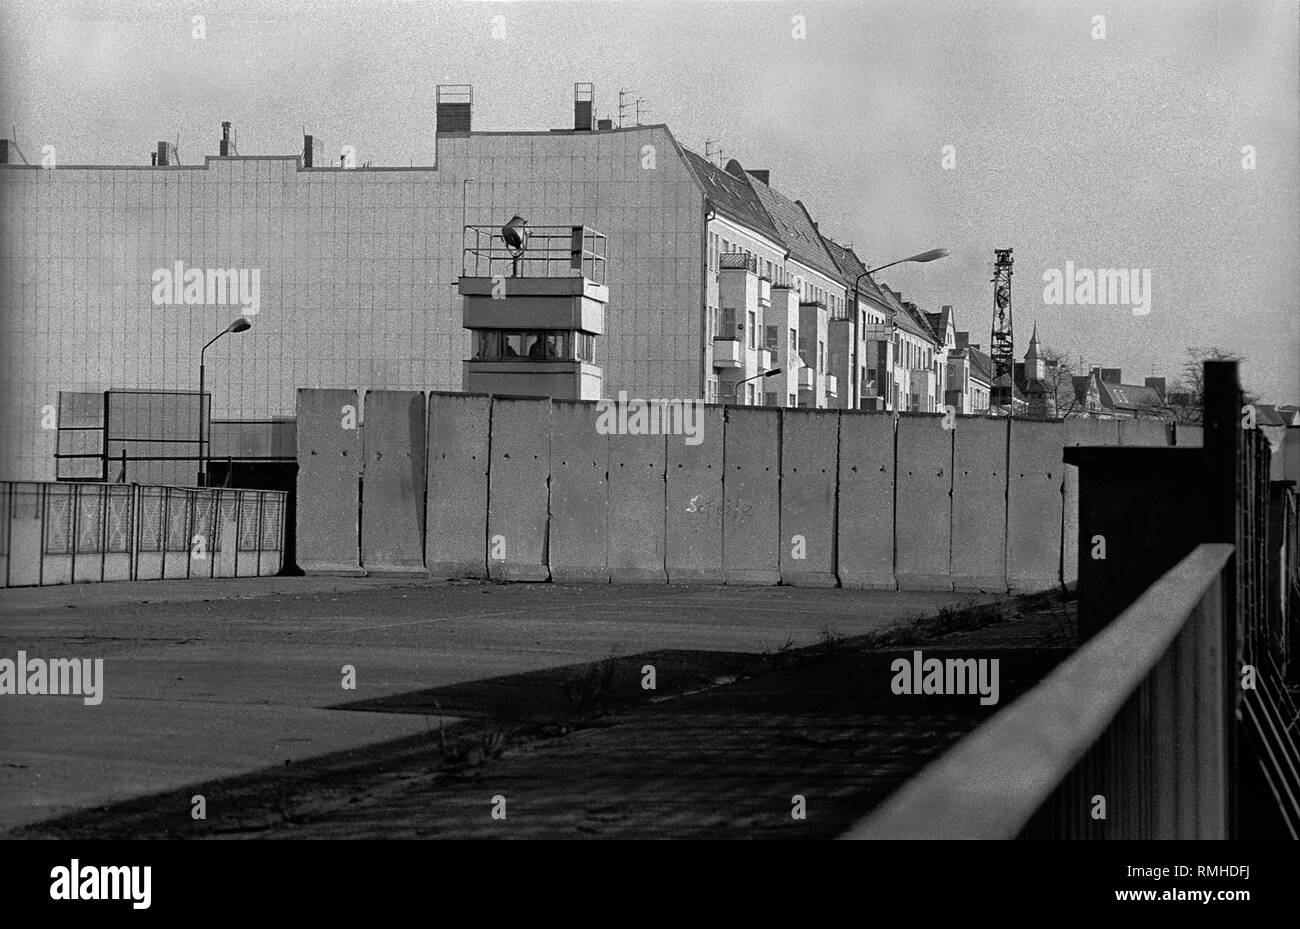 Watchtower and wall of the border installations of the GDR on Behmstrasse, seen from the Behmbruecke, Germany, Prenzlauer Berg, Berlin,  April 4, 1990. Stock Photo